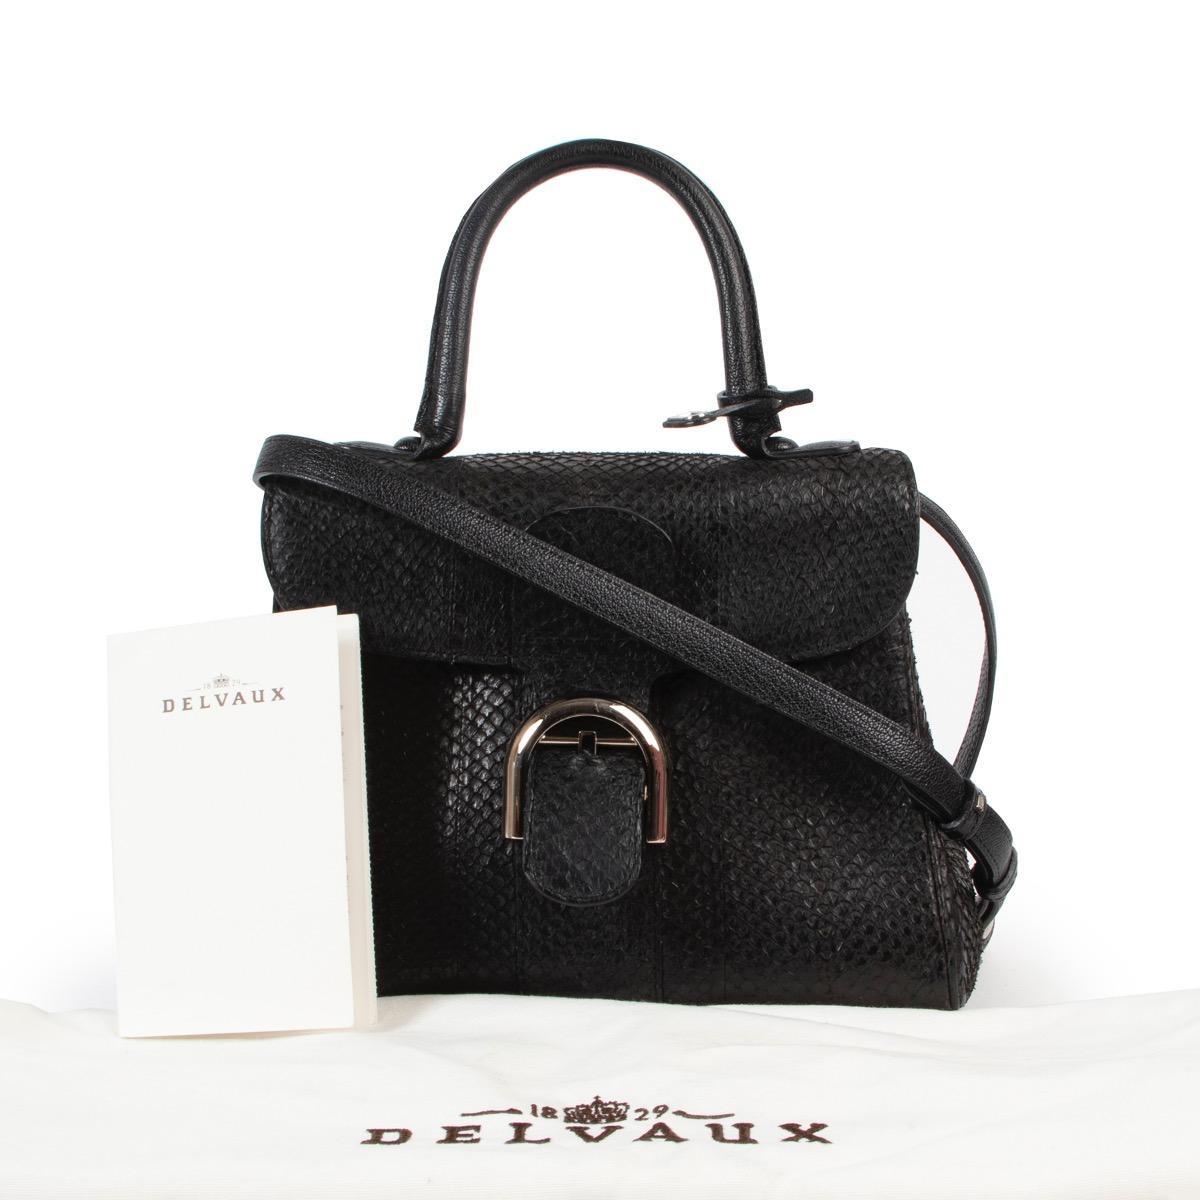 Delvaux Black Exotic PM Brillant

This Delvaux Brillant is a true one-a-kind beauty that makes our hearts beat faster.

Crafted in black exotic fish skin and finished with a silver toned D buckle. The iconic silver toned Brillant clasp gives acces